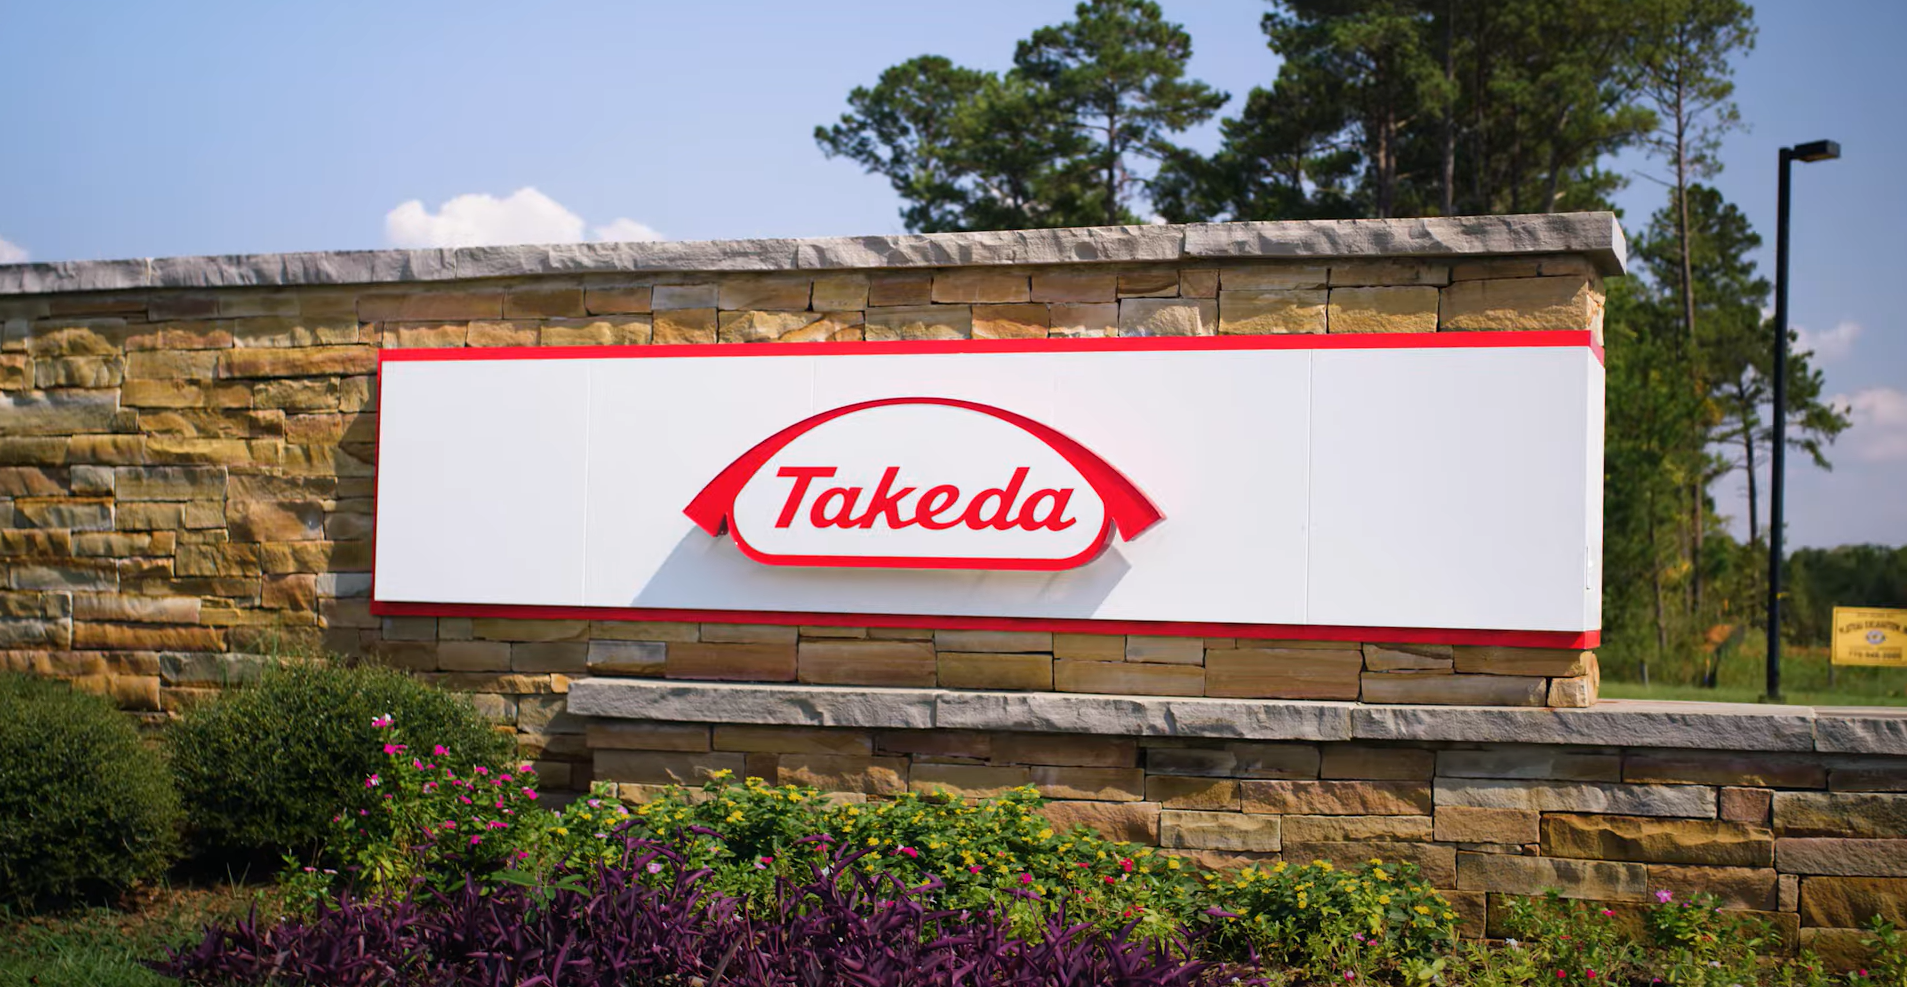 Watch Video: Takeda in Covington, GA, USA - World-class manufacturing of plasma-derived therapies